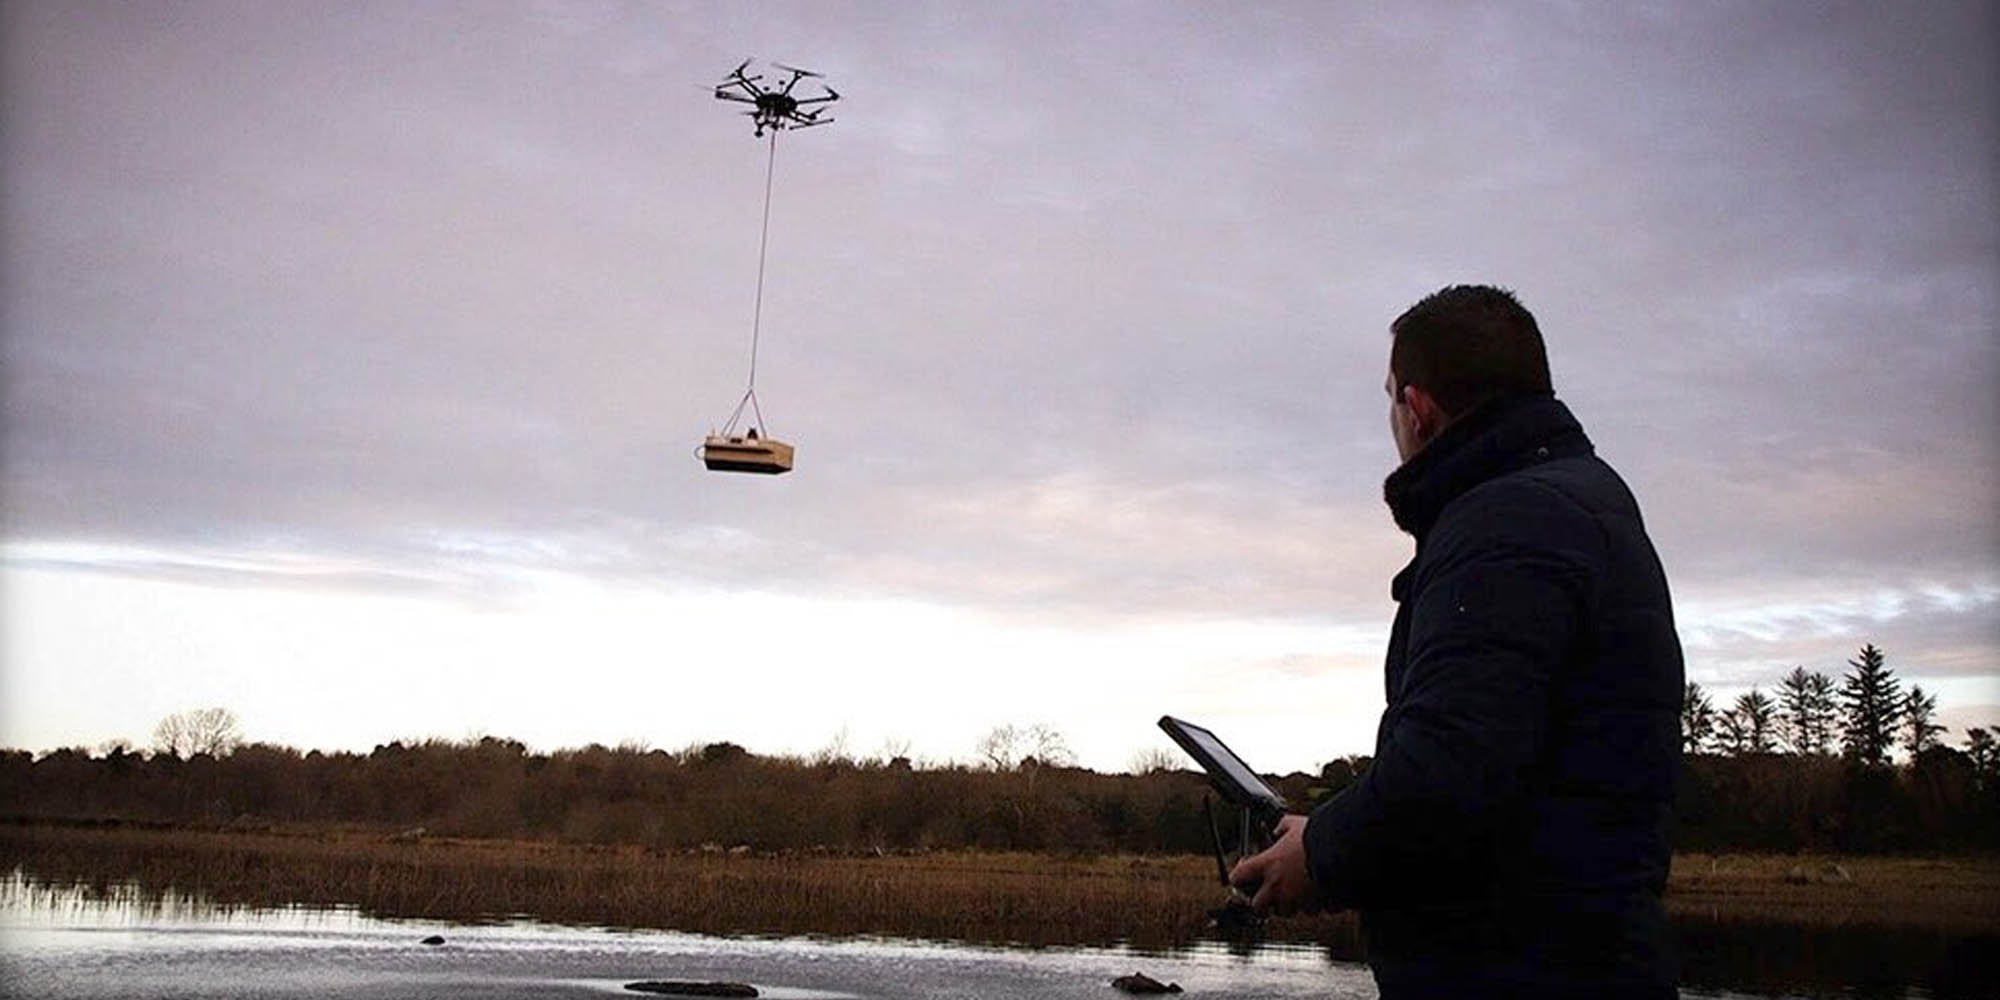 Irish lakes could be tested by drones under EU water directive - DroneDJ